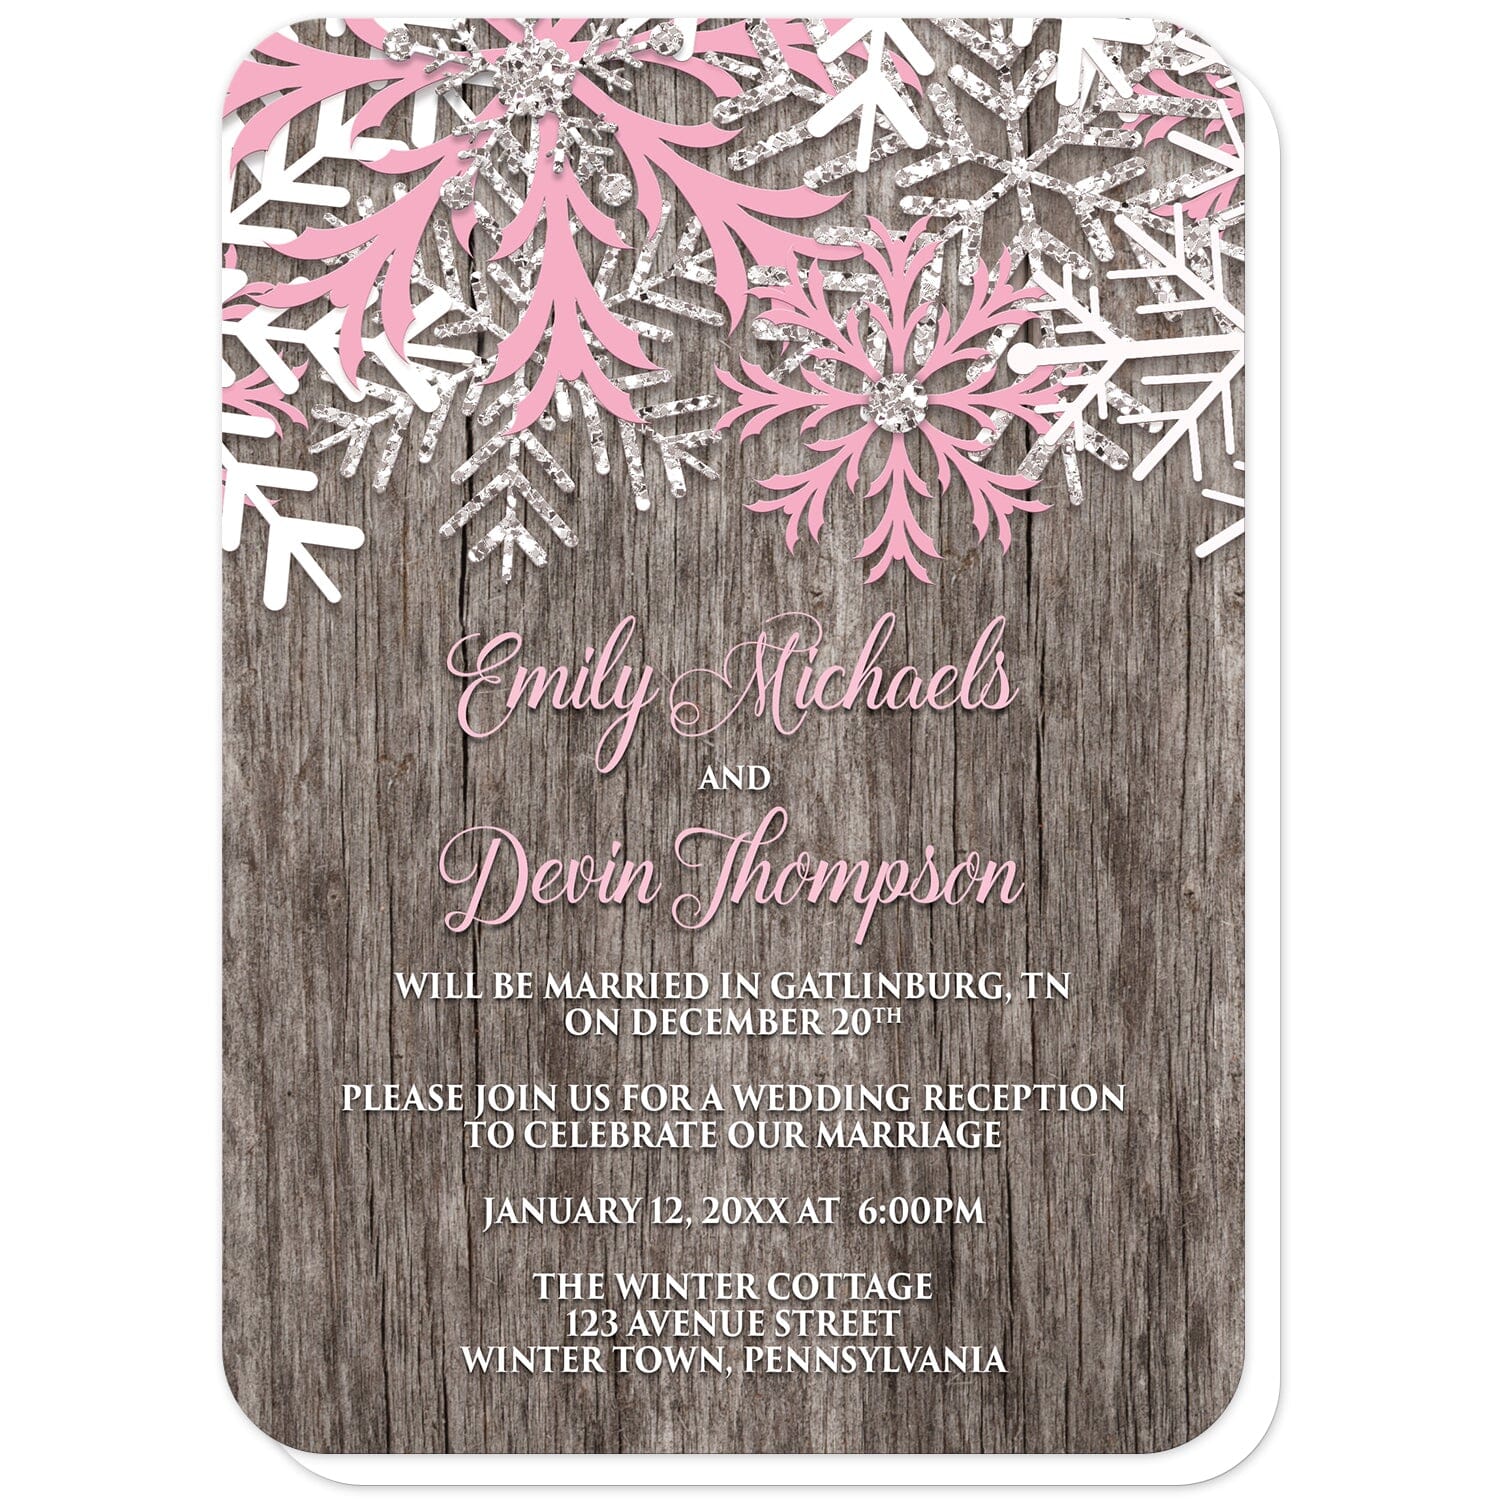 Rustic Winter Wood Pink Snowflake Reception Only Invitations (with rounded corners) at Artistically Invited. Country-inspired rustic winter wood pink snowflake reception only invitations designed with pink, white, and silver-colored glitter-illustrated snowflakes along the top over a rustic wood pattern illustration. Your personalized post-wedding reception details are custom printed in pink and white over the wood background below the snowflakes.